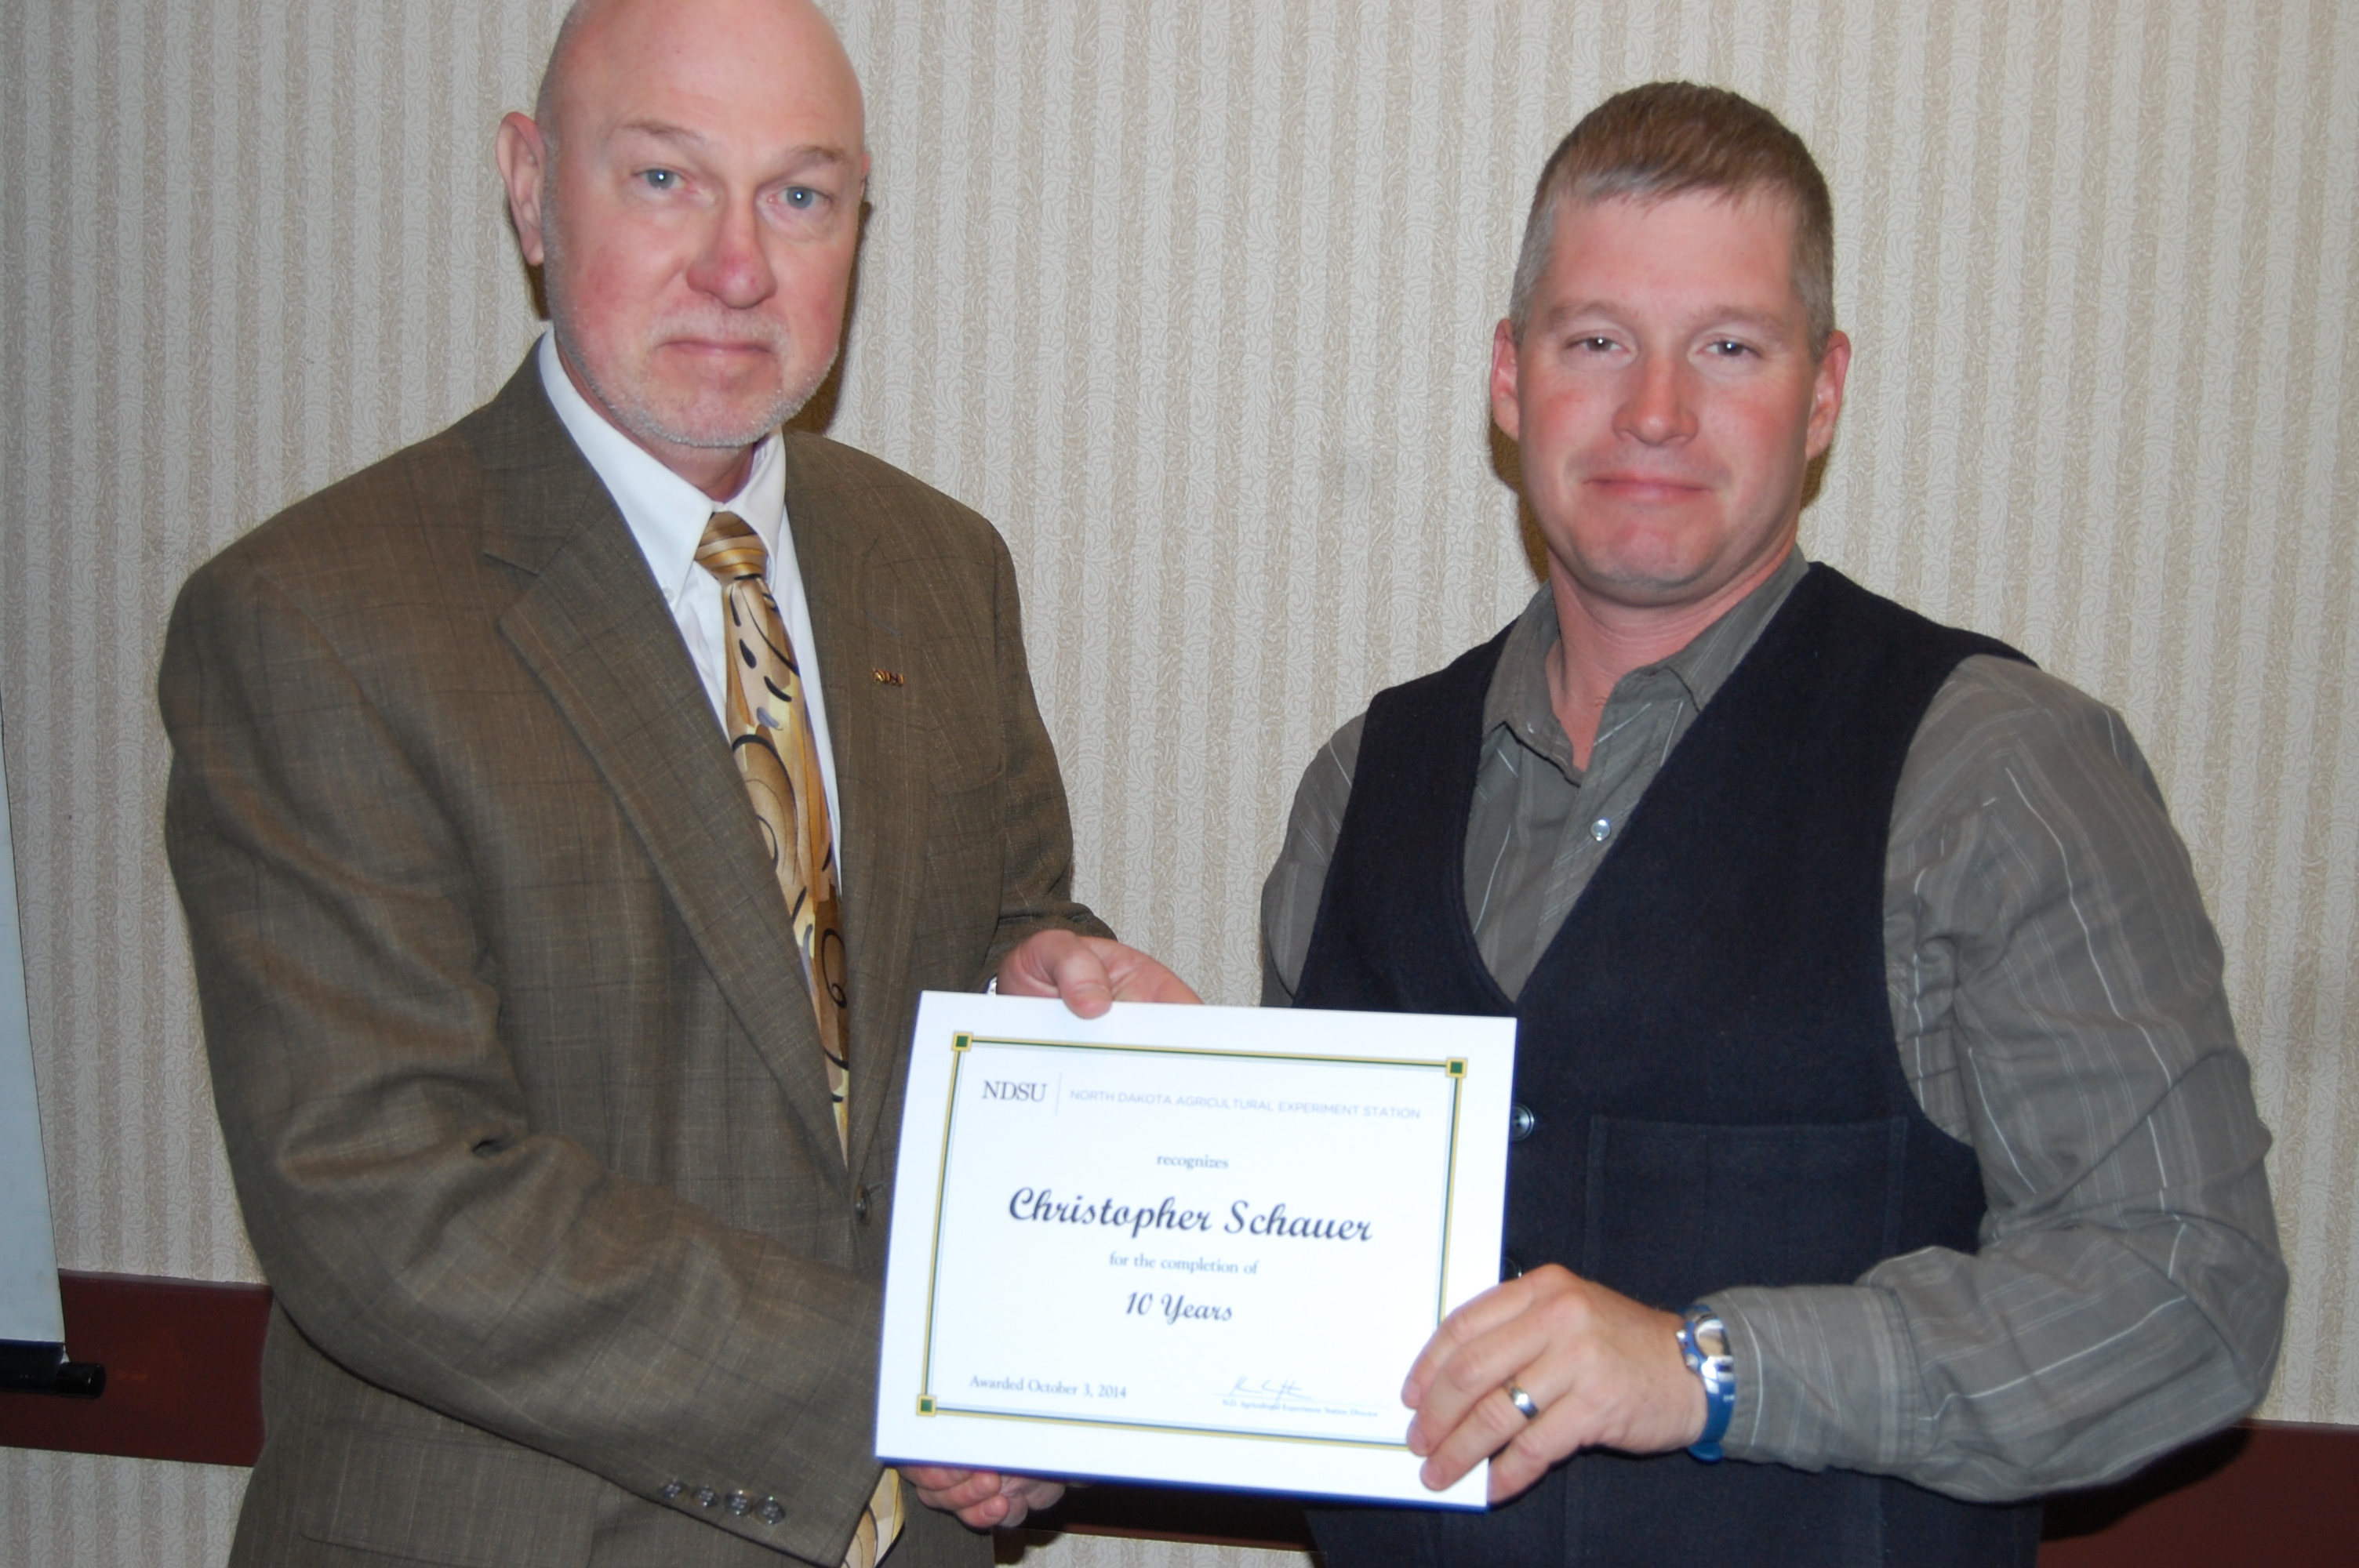 Ken Grafton, vice president for Agricultural Affairs, director of the North Dakota Agricultural Experiment Station and dean of the College of Agriculture, Food Systems, and Natural Resources (left), presents the award to Christopher Schauer.